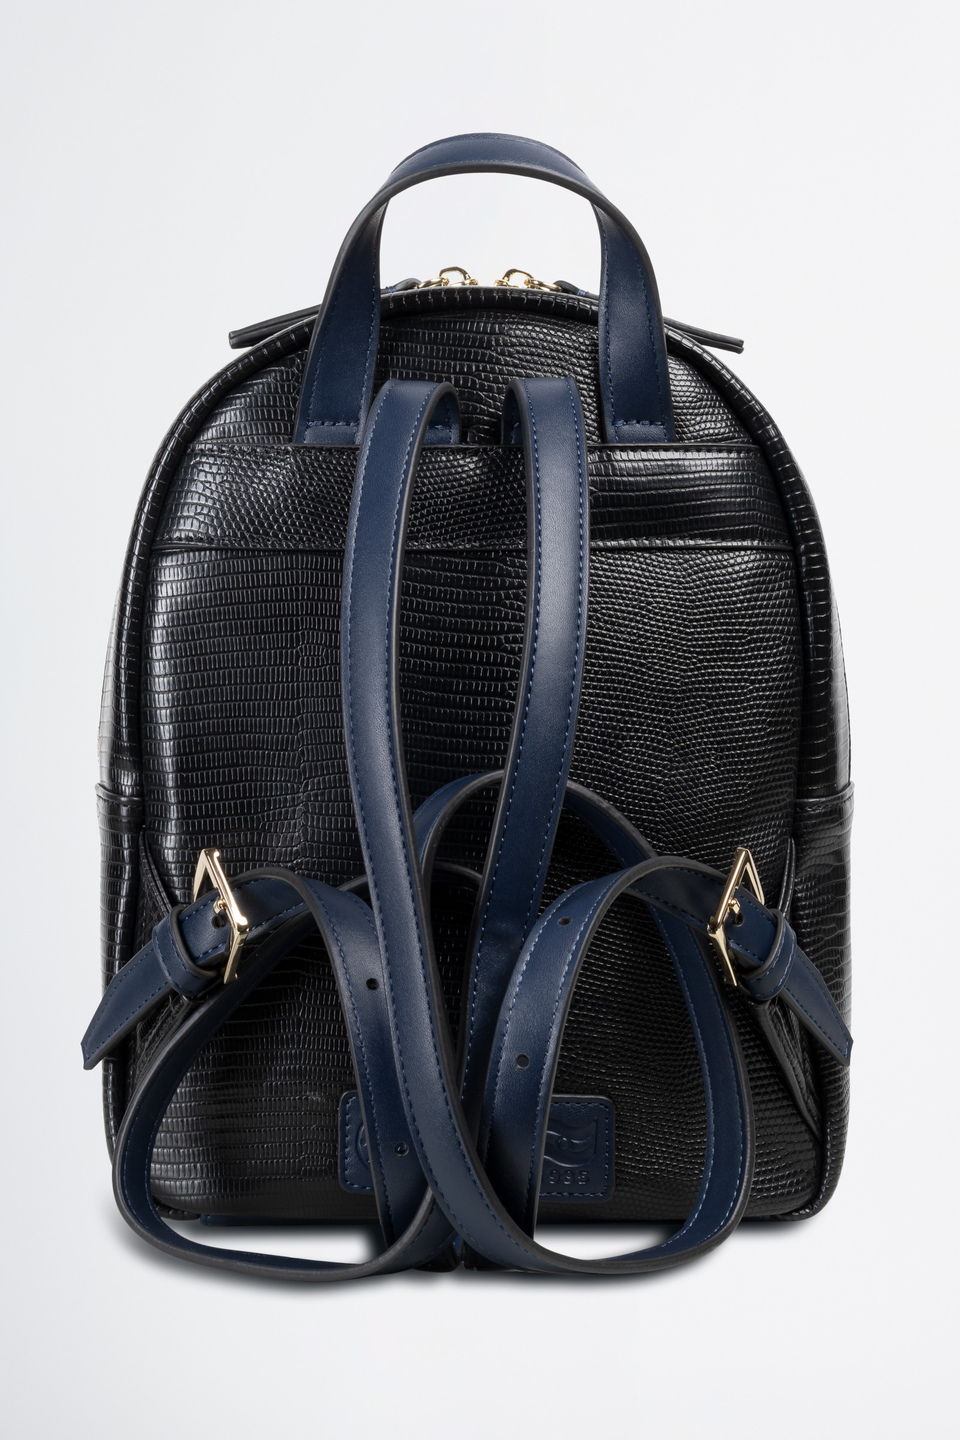 Backpack in synthetic fabric | La Martina - Official Online Shop